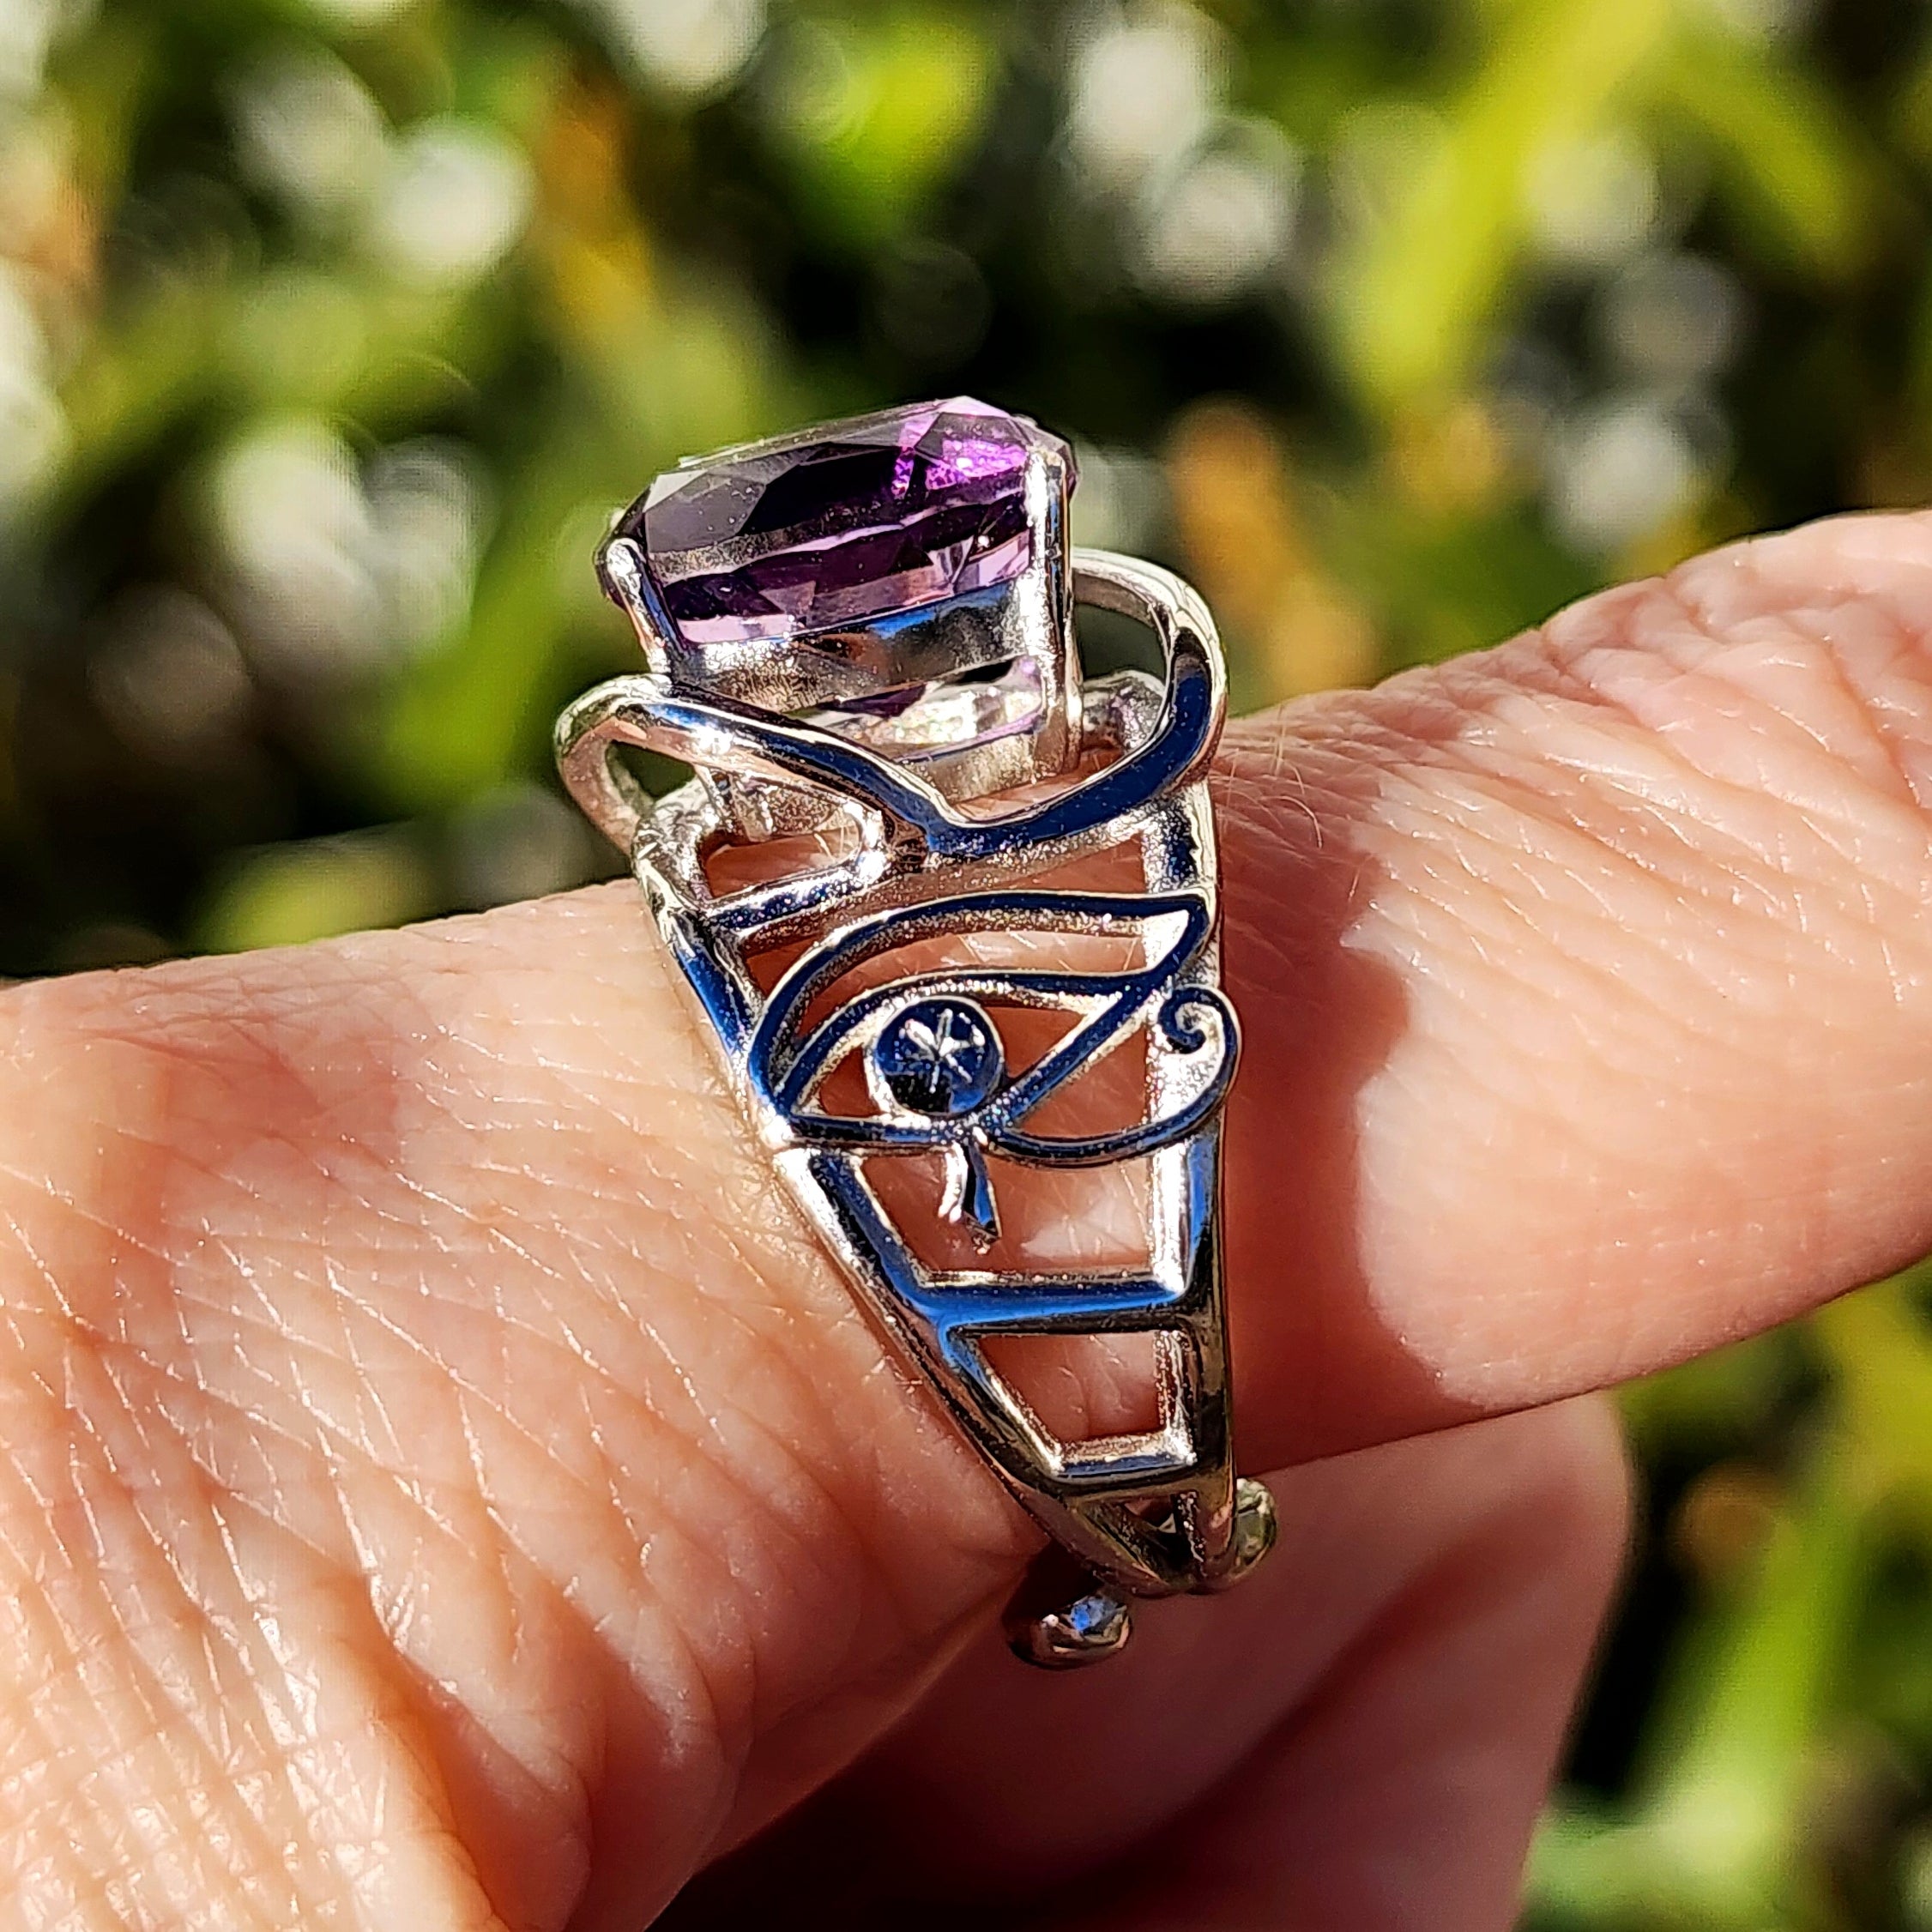 Amethyst Egyptian Eye Adjustable Finger Cuff Ring .925 Silver for Intuition, Luck, Protection and Purification